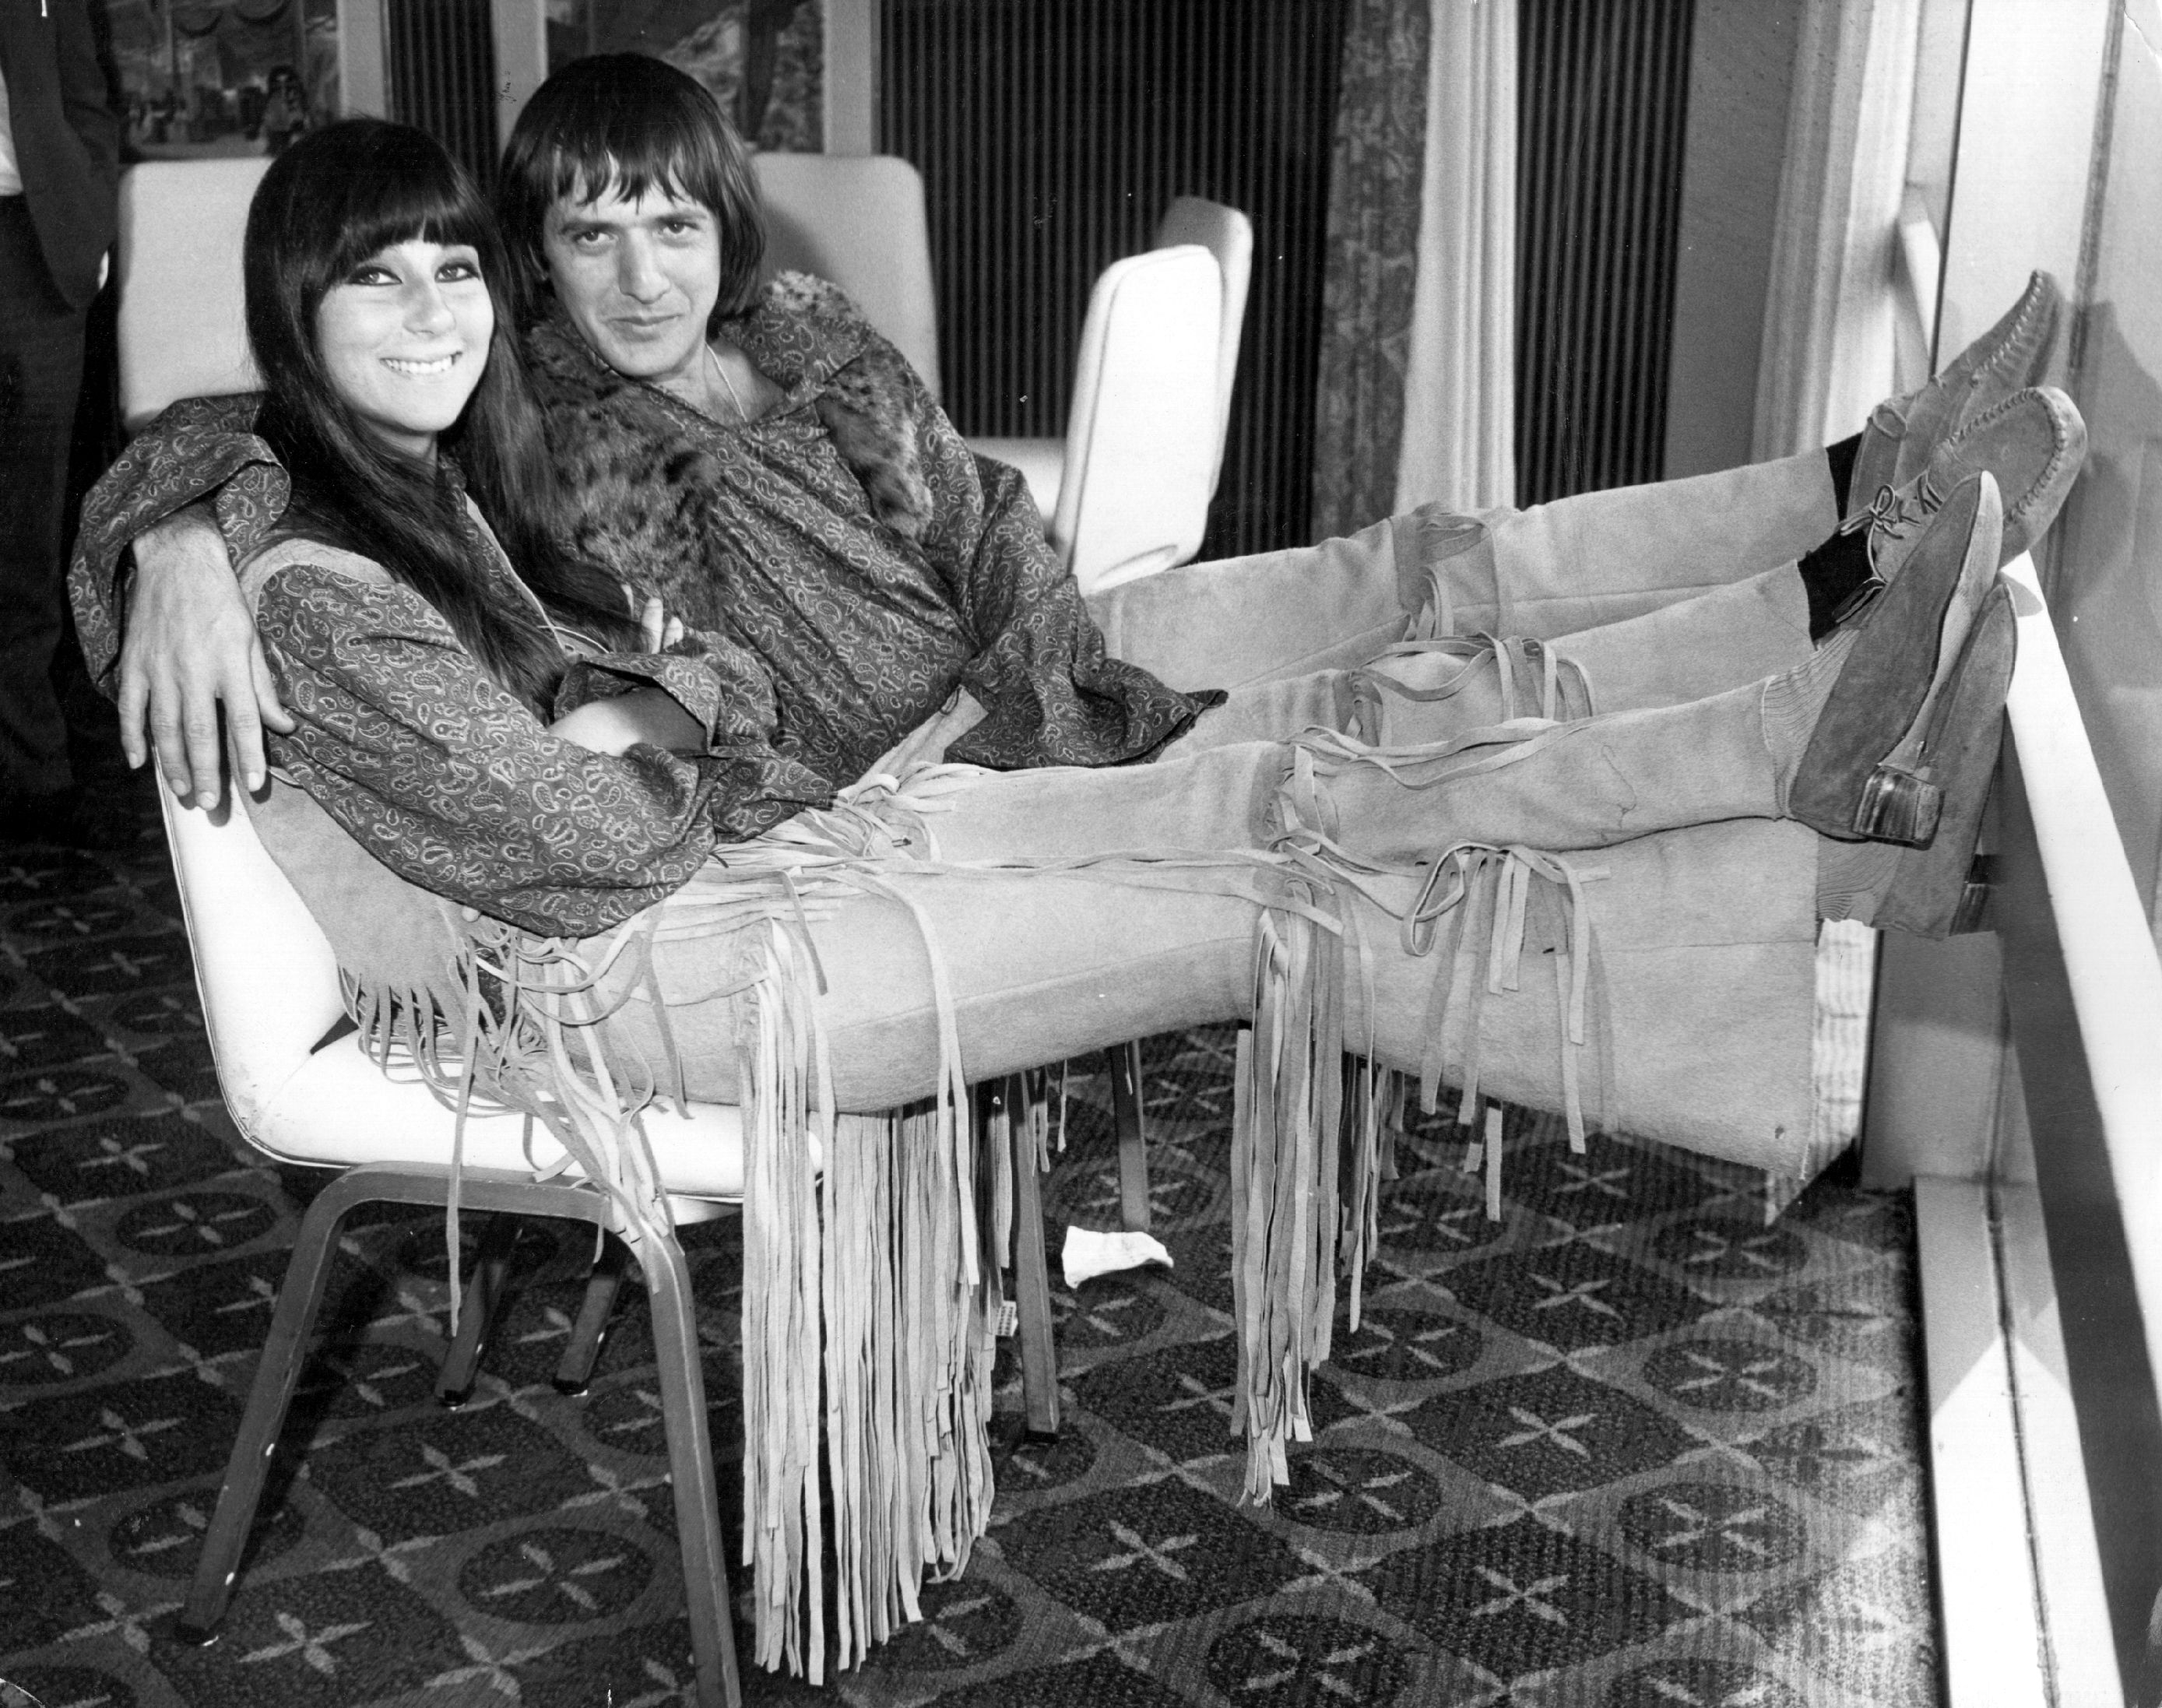 Singers Sonny Bono and Cher at the Hilton Hotel, London on August 3, 1965 | Source: Getty Images